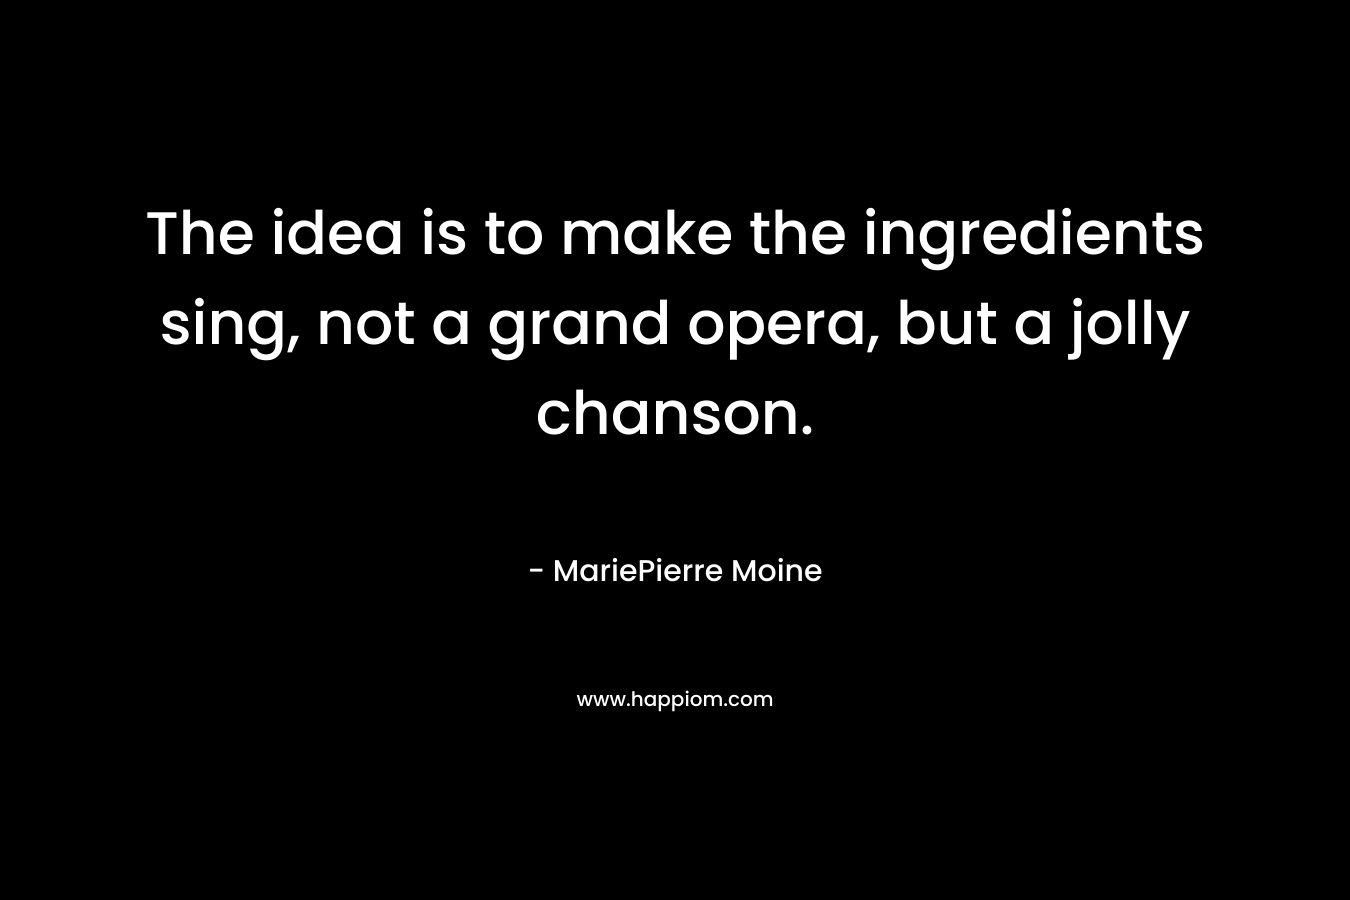 The idea is to make the ingredients sing, not a grand opera, but a jolly chanson. – MariePierre Moine